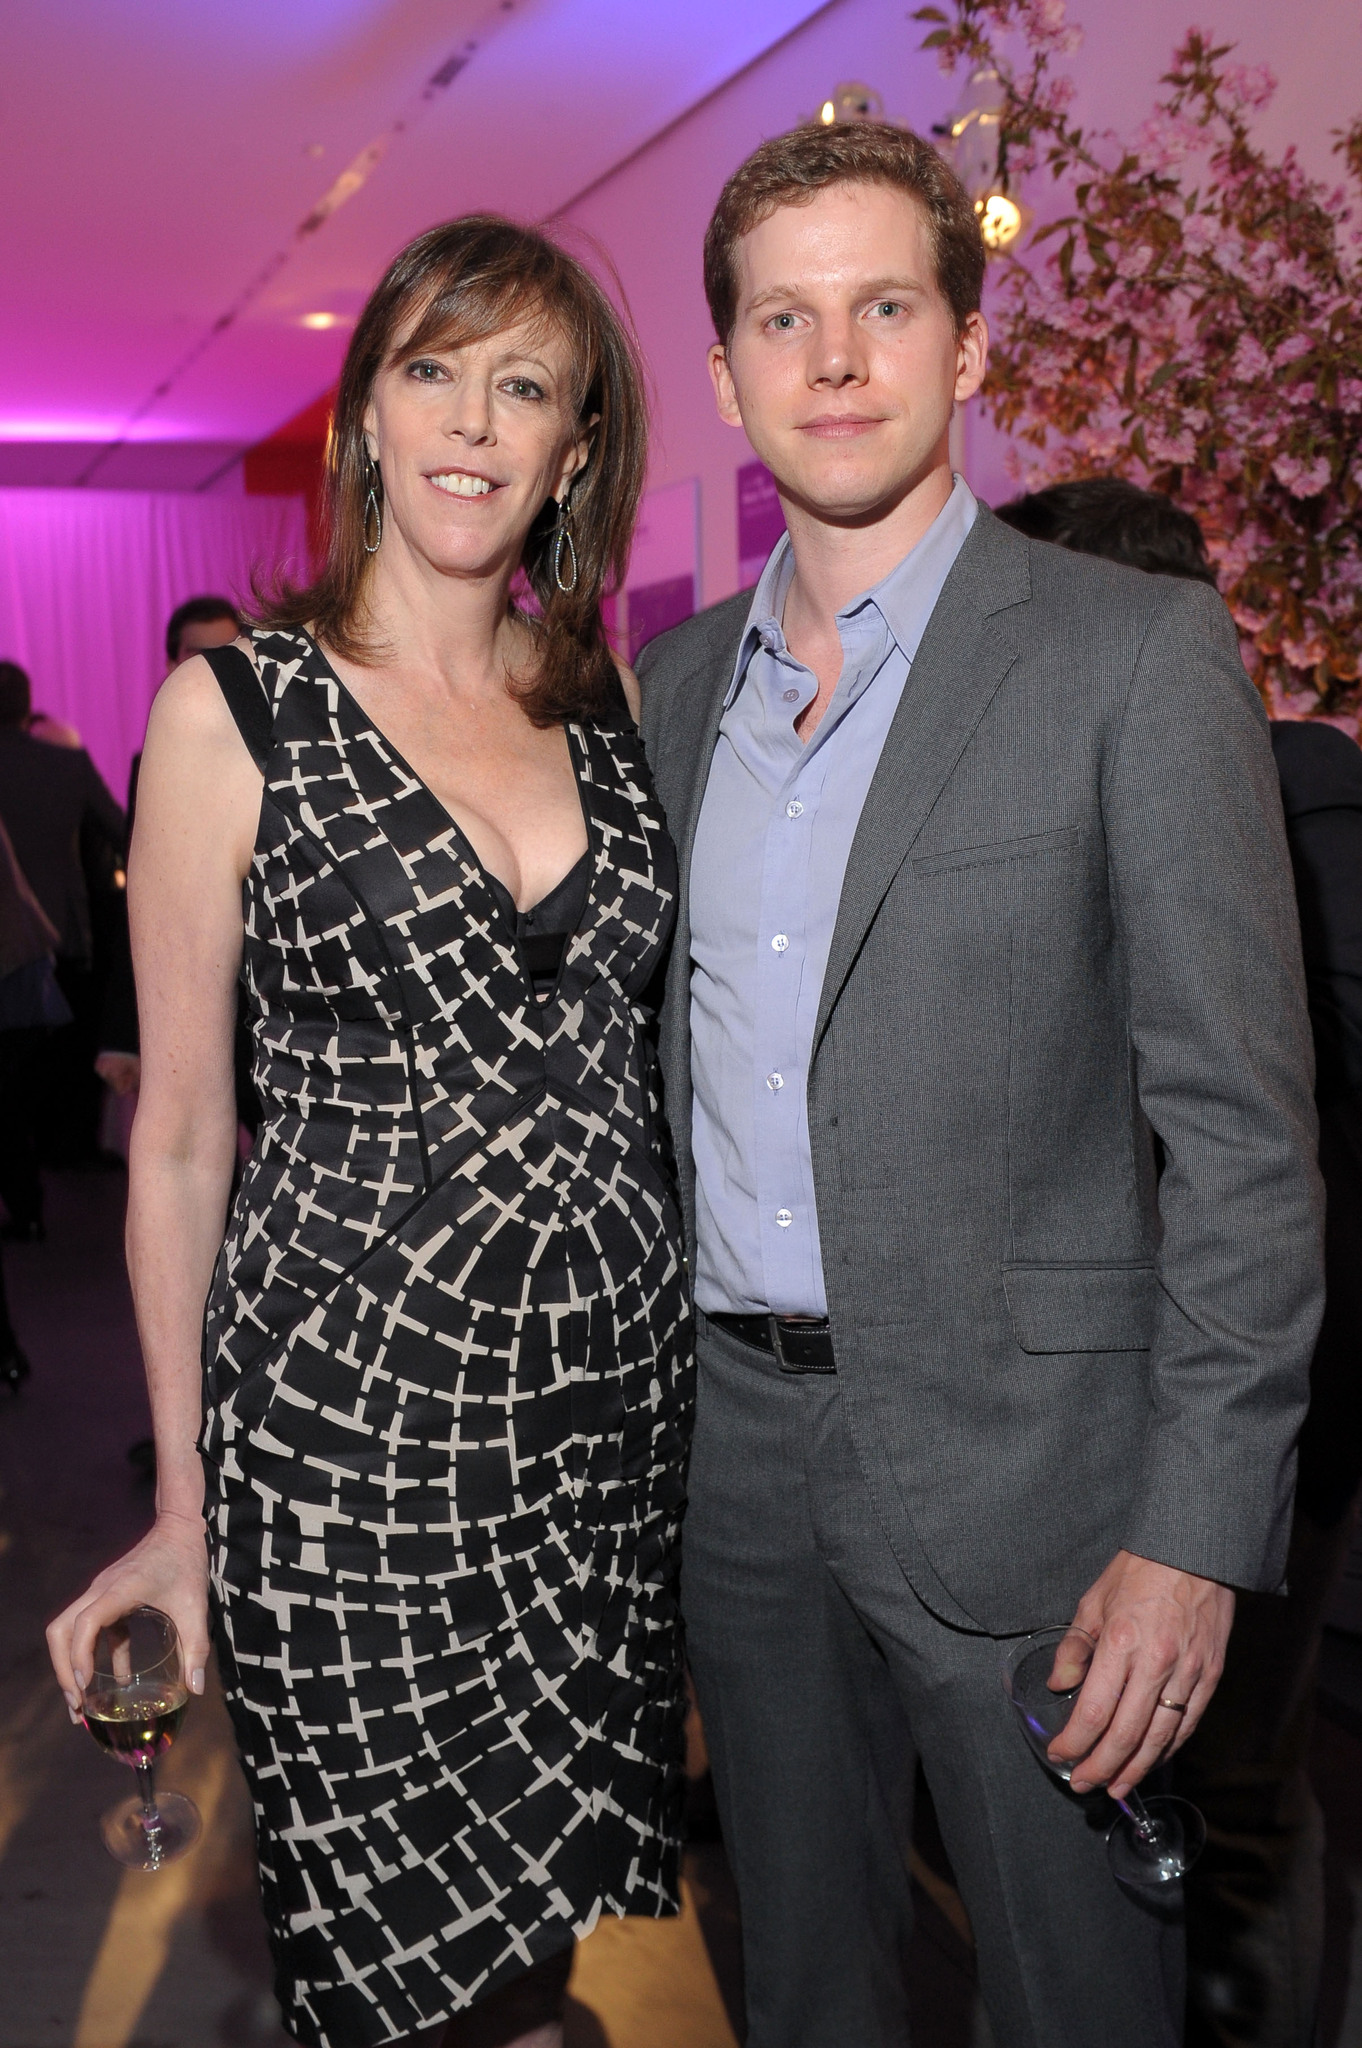 Jane Rosenthal and Stark Sands at event of Susizadeje penkerius metus (2012)